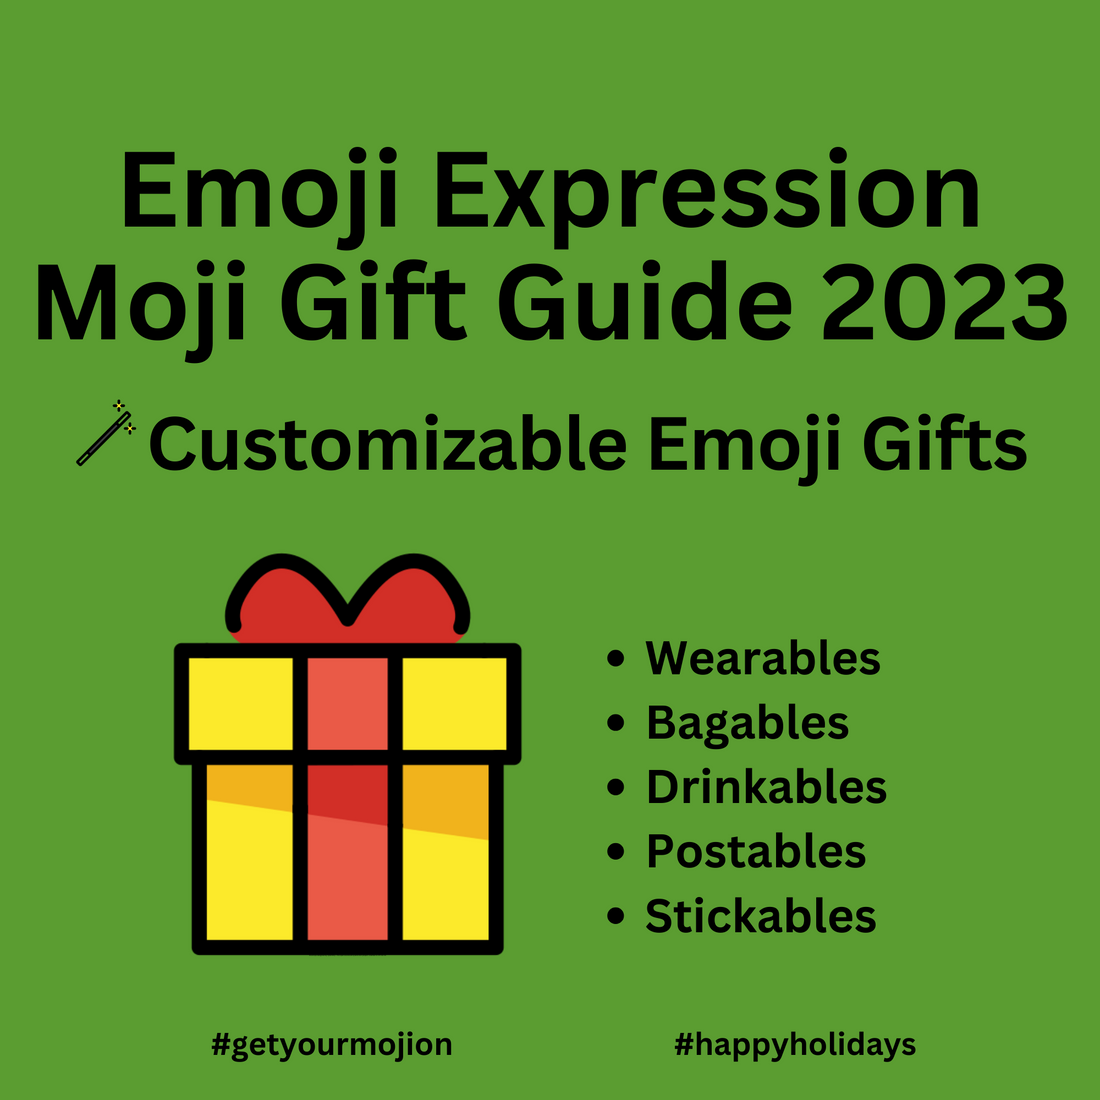 Express Your Holiday Spirit with Custom Emoji Gifts! 🎁🌟